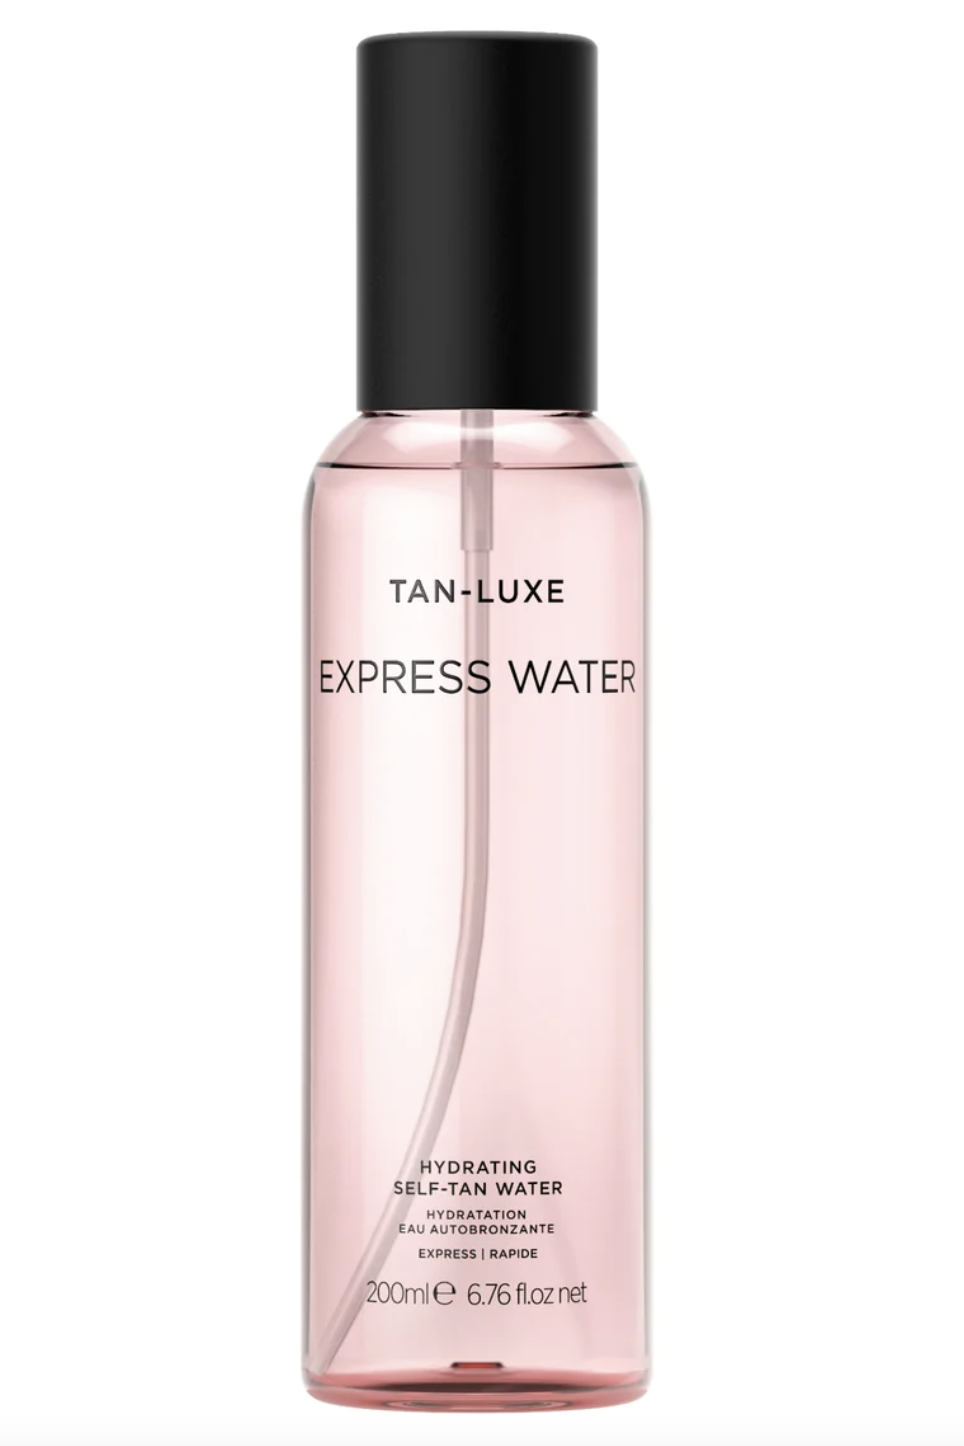 The Express Water